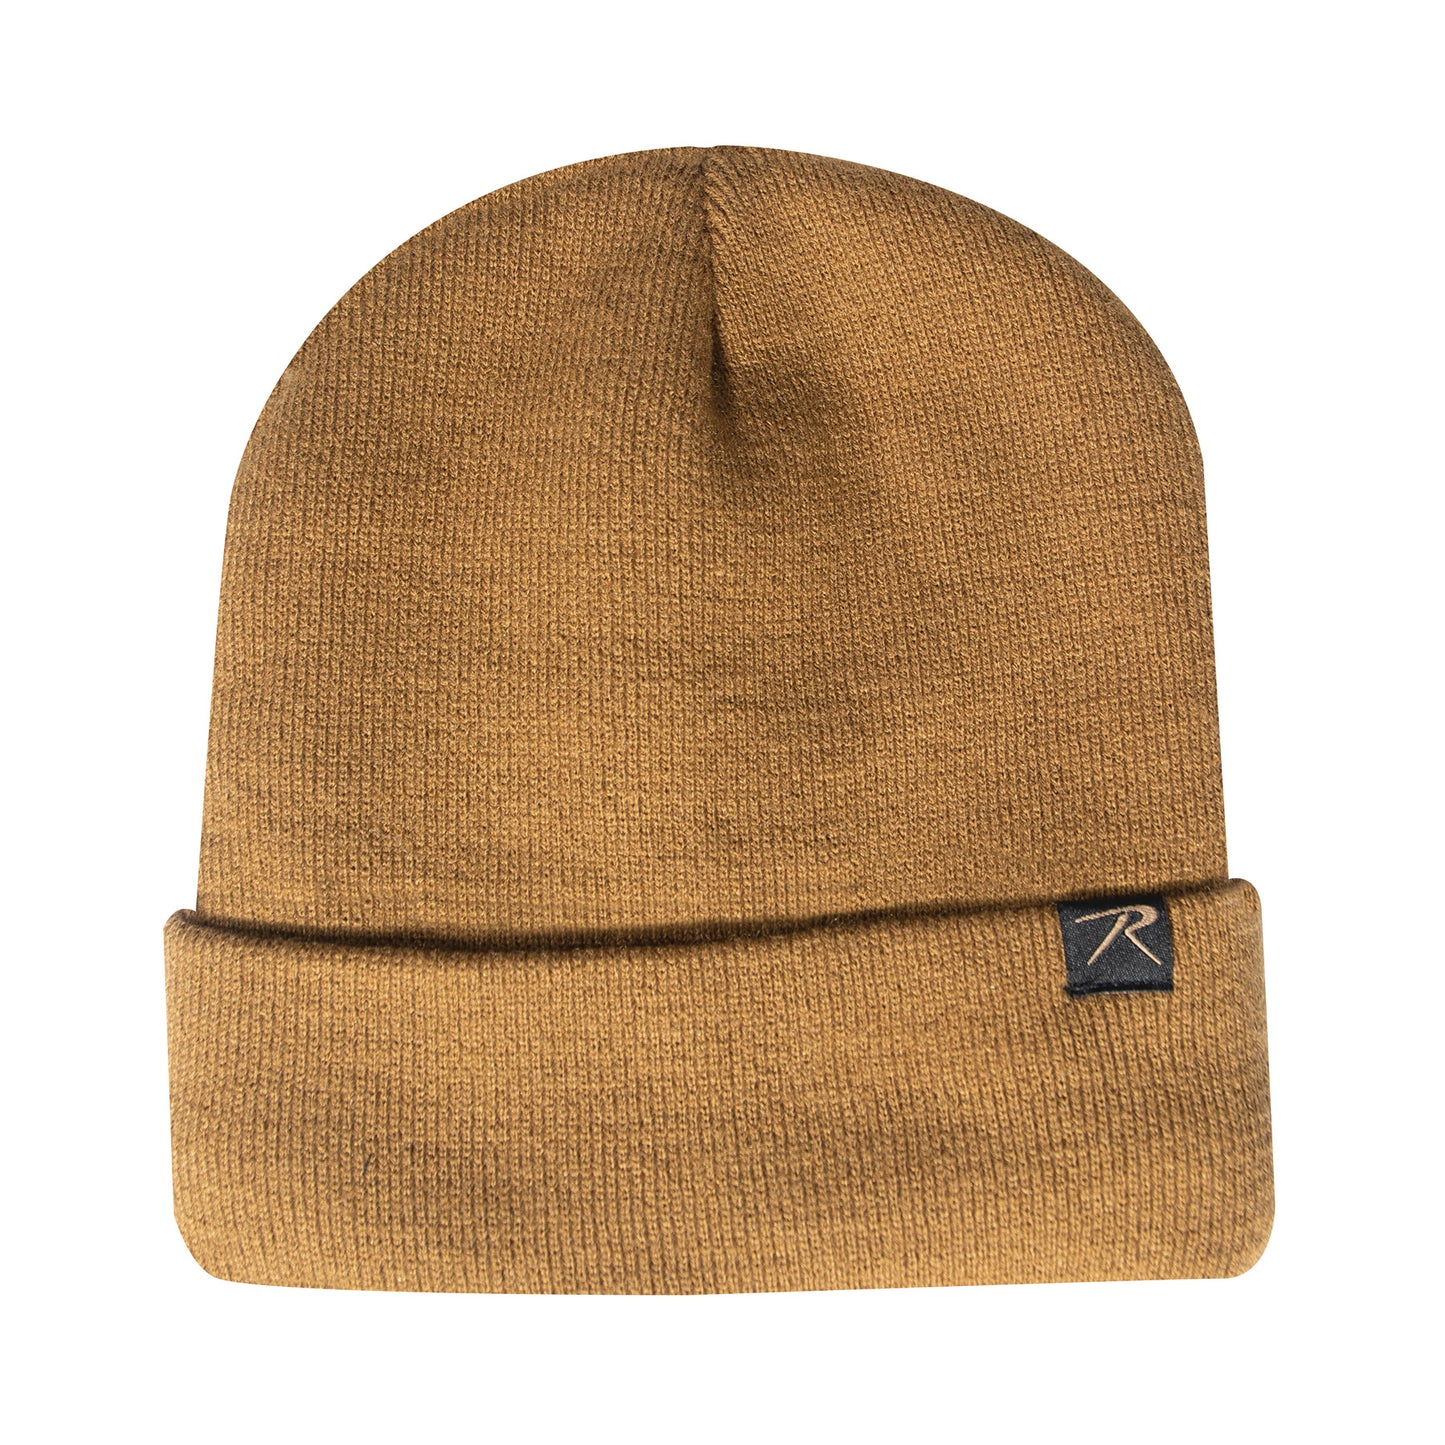 Rothco Fine Knit Sherpa Lined Watch Cap Winter Hat